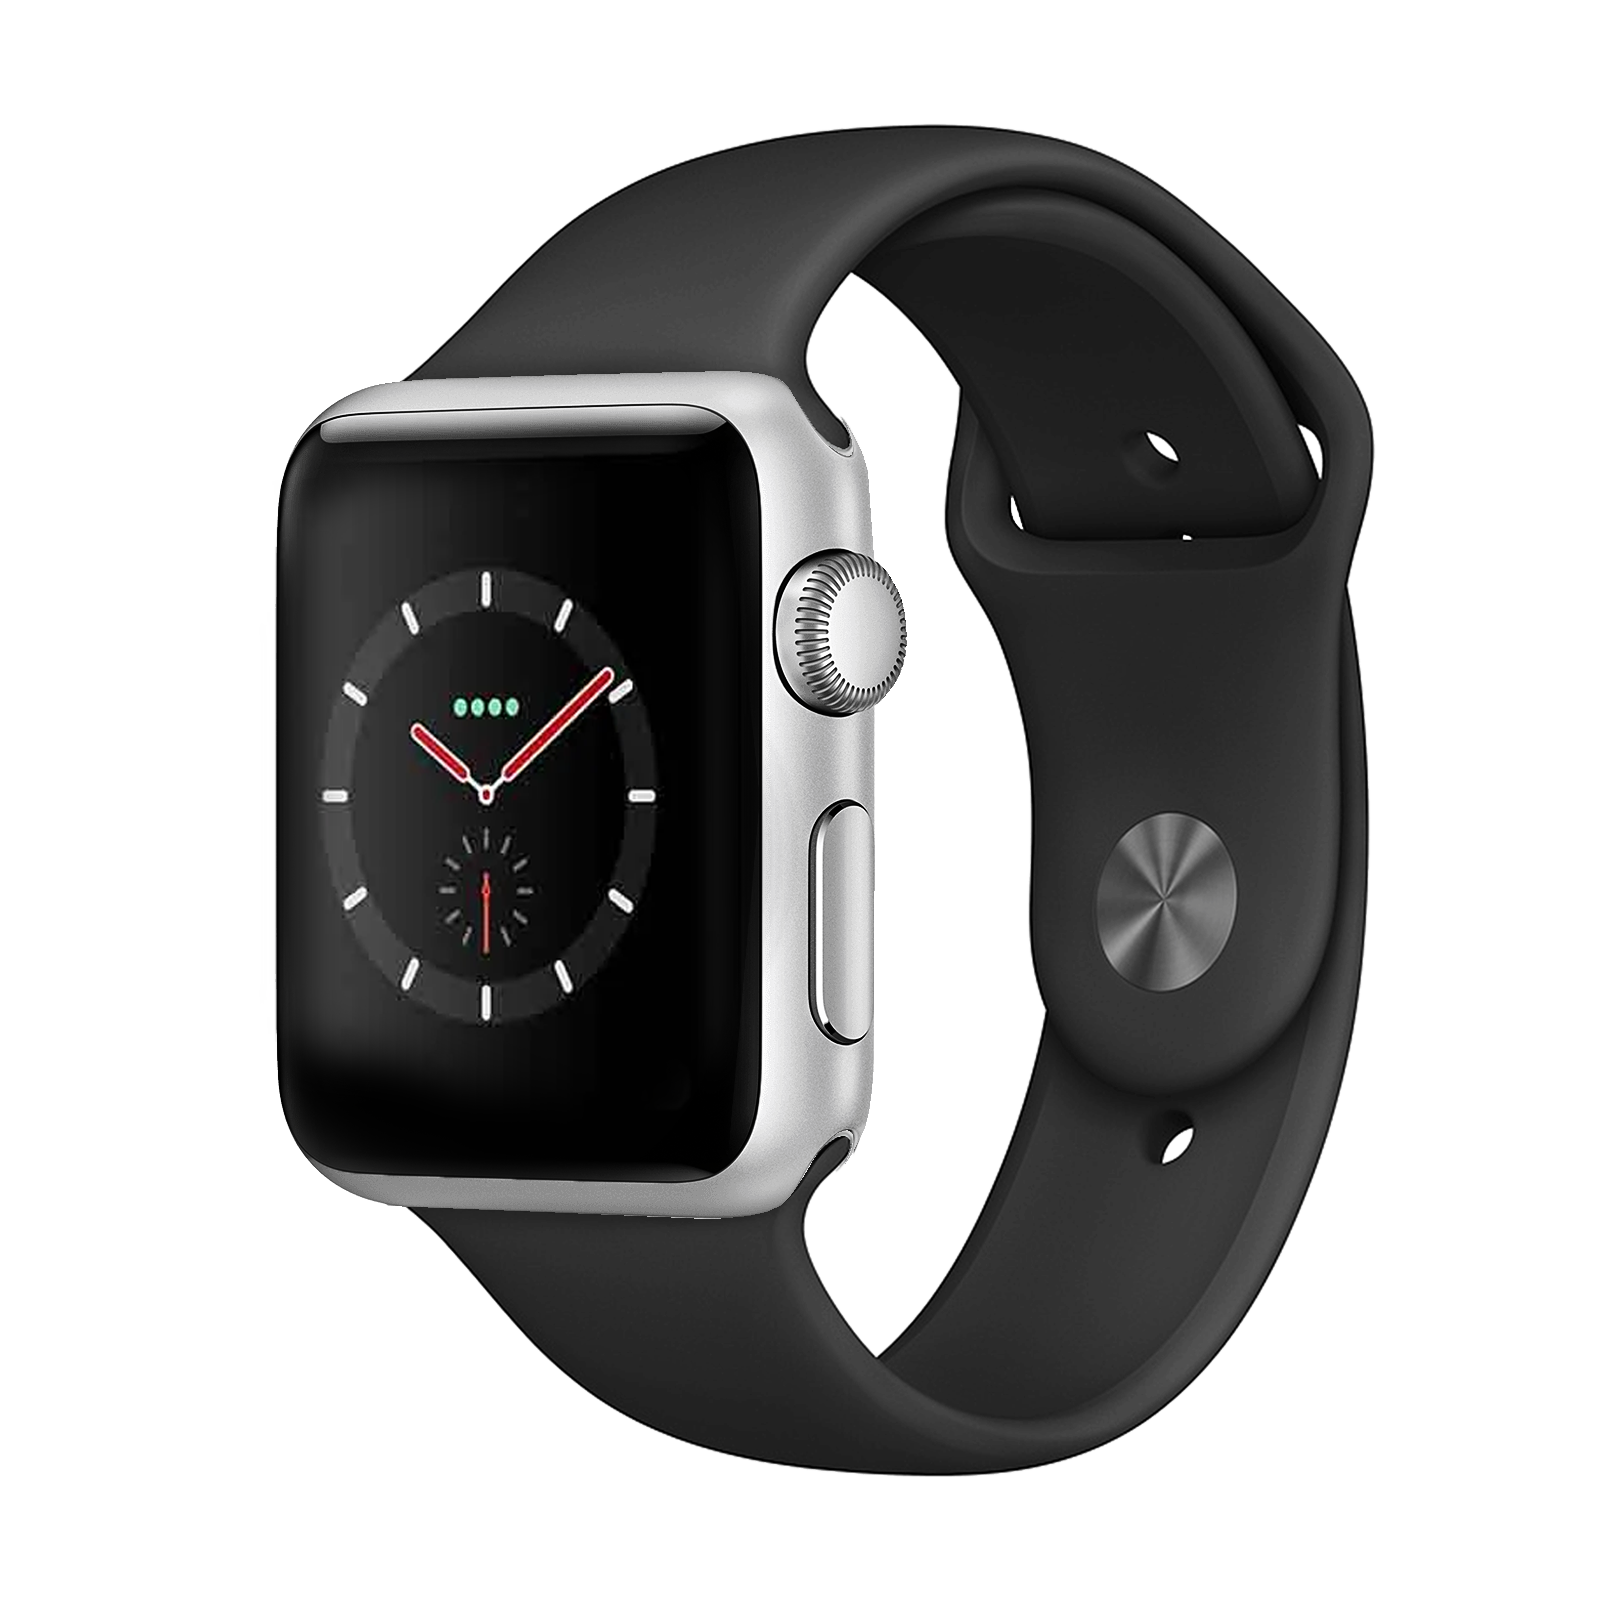 Apple Watch Series 3 Stainless 42mm Silver Very Good - WiFi